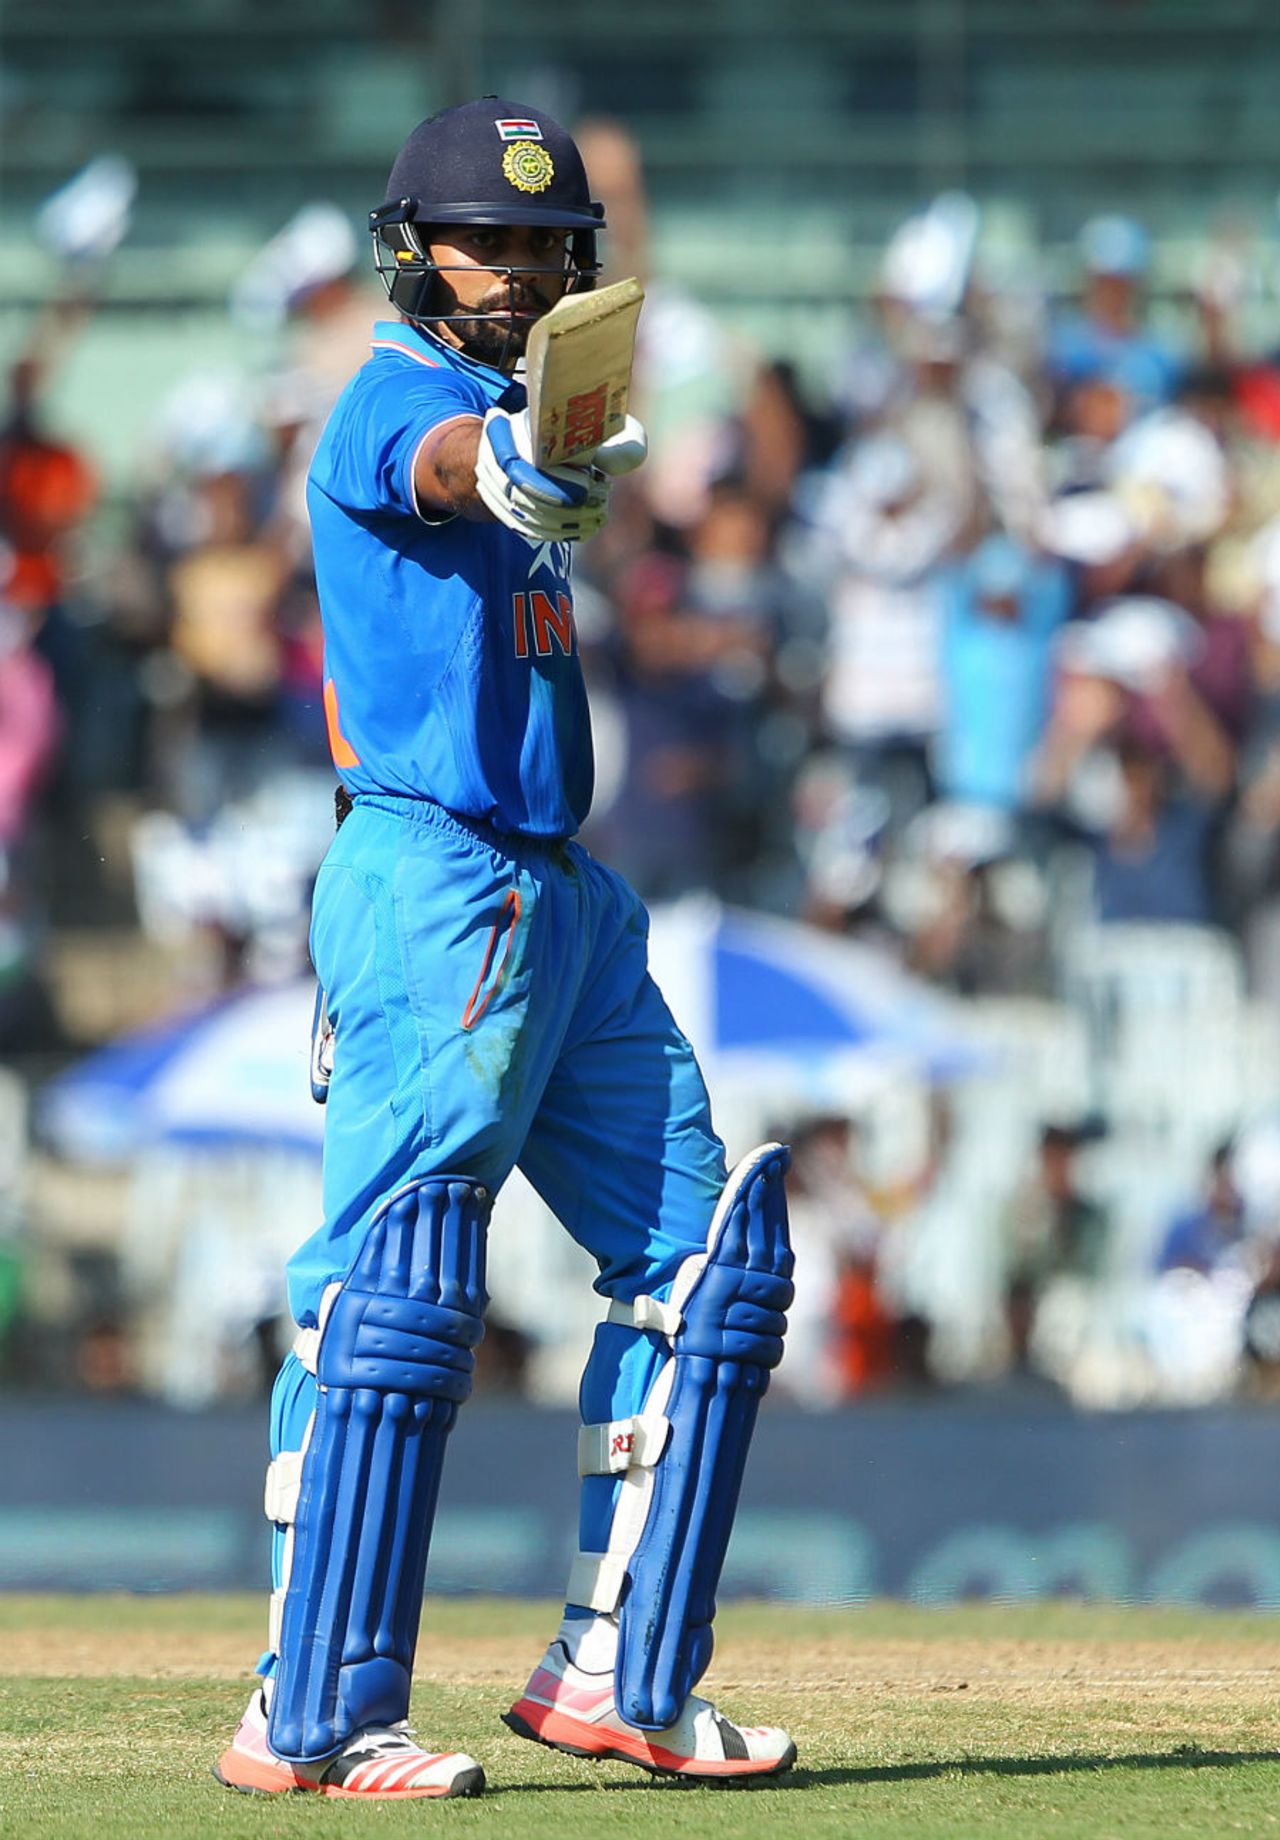 Virat Kohli acknowledges the crowd after getting to fifty, India v South Africa, 4th ODI, Chennai, October 22, 2015